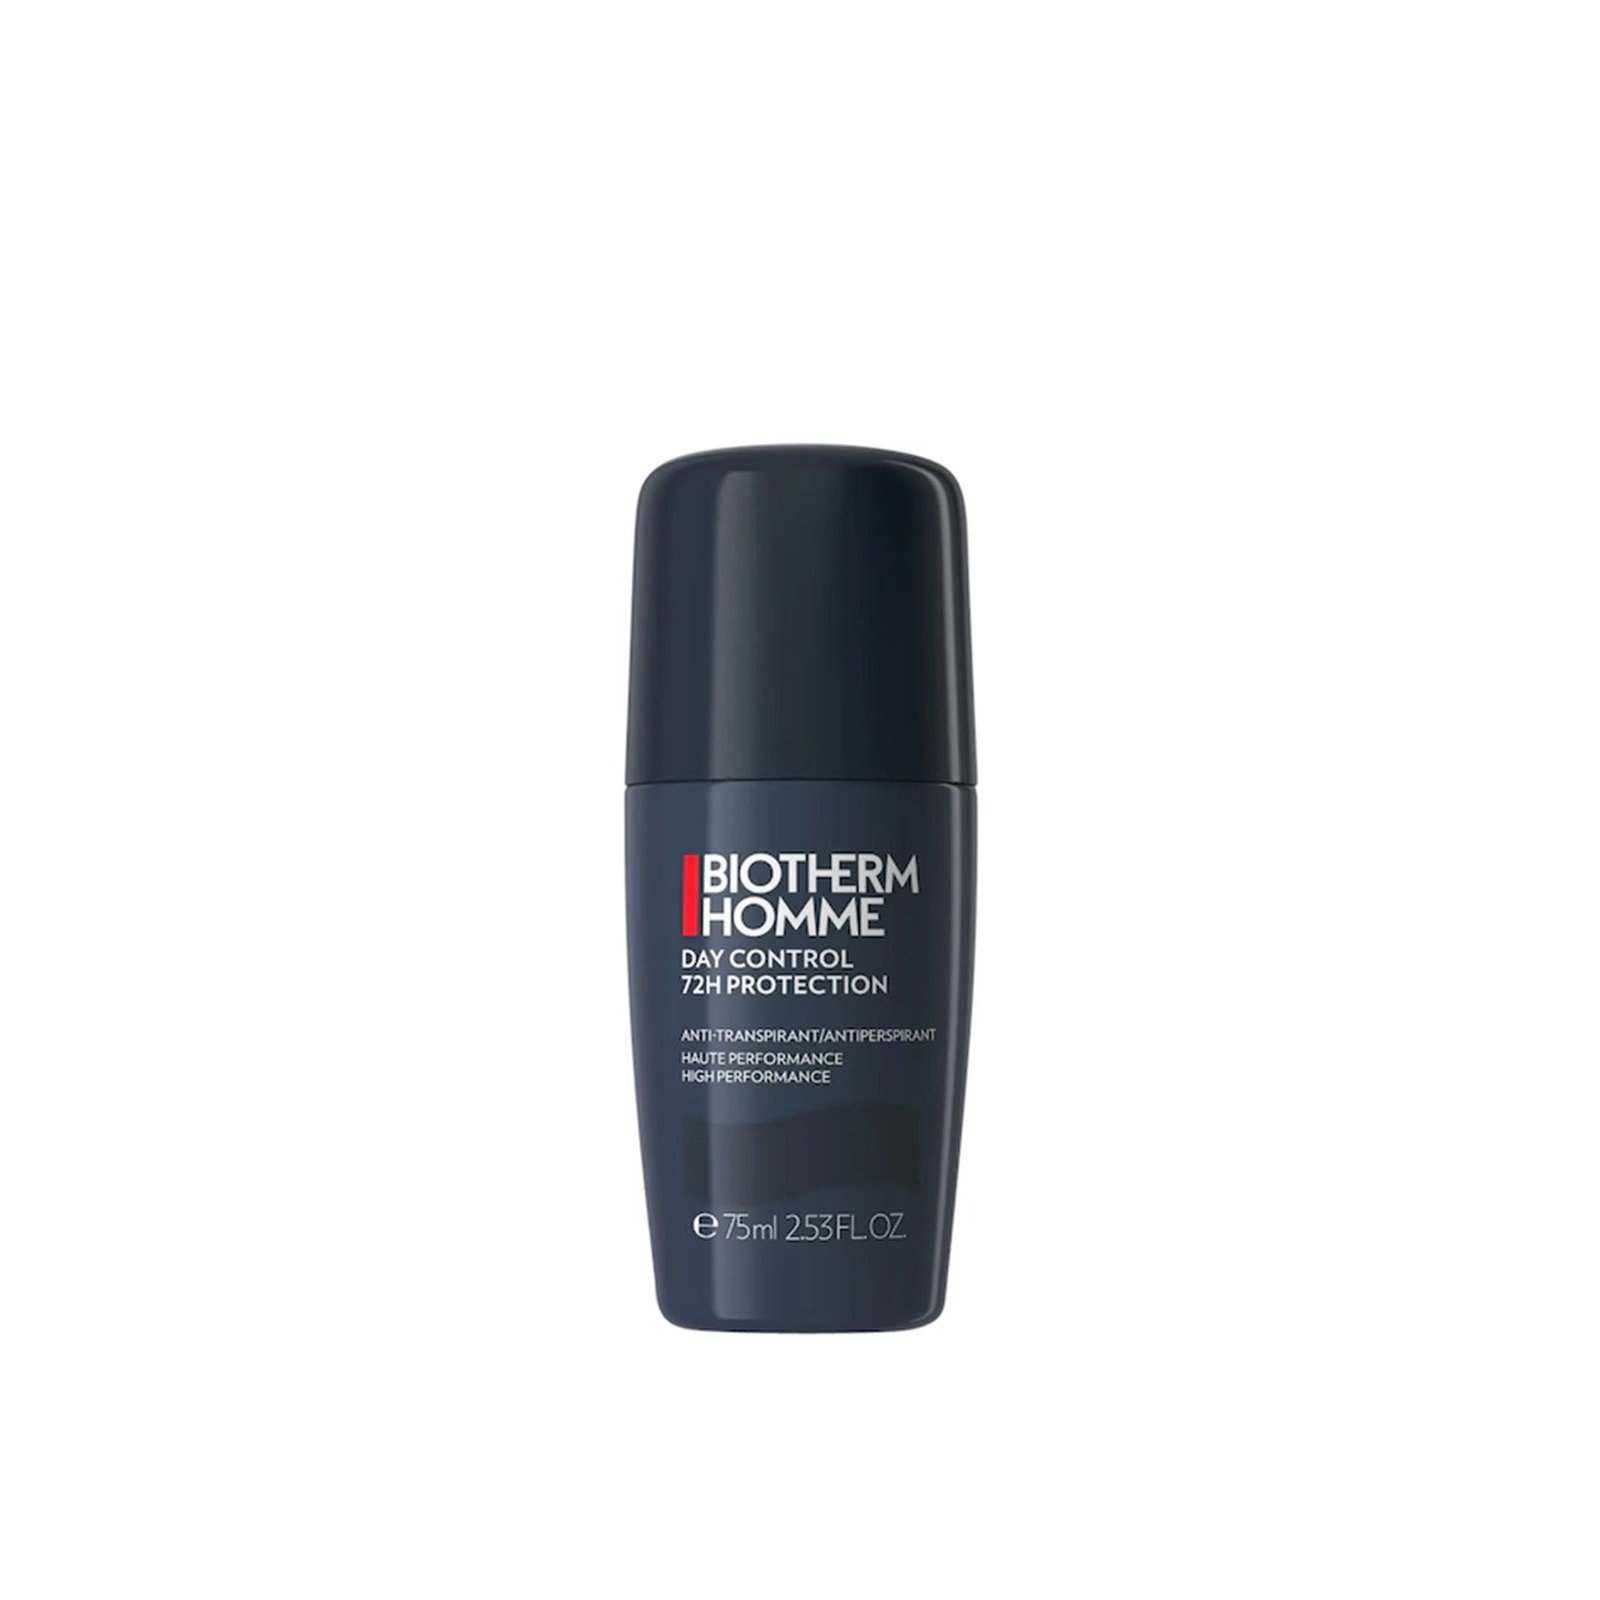 Biotherm Homme Day Control 72h Protection Anti-Perspirant Roll-On 75ml (2.53floz)